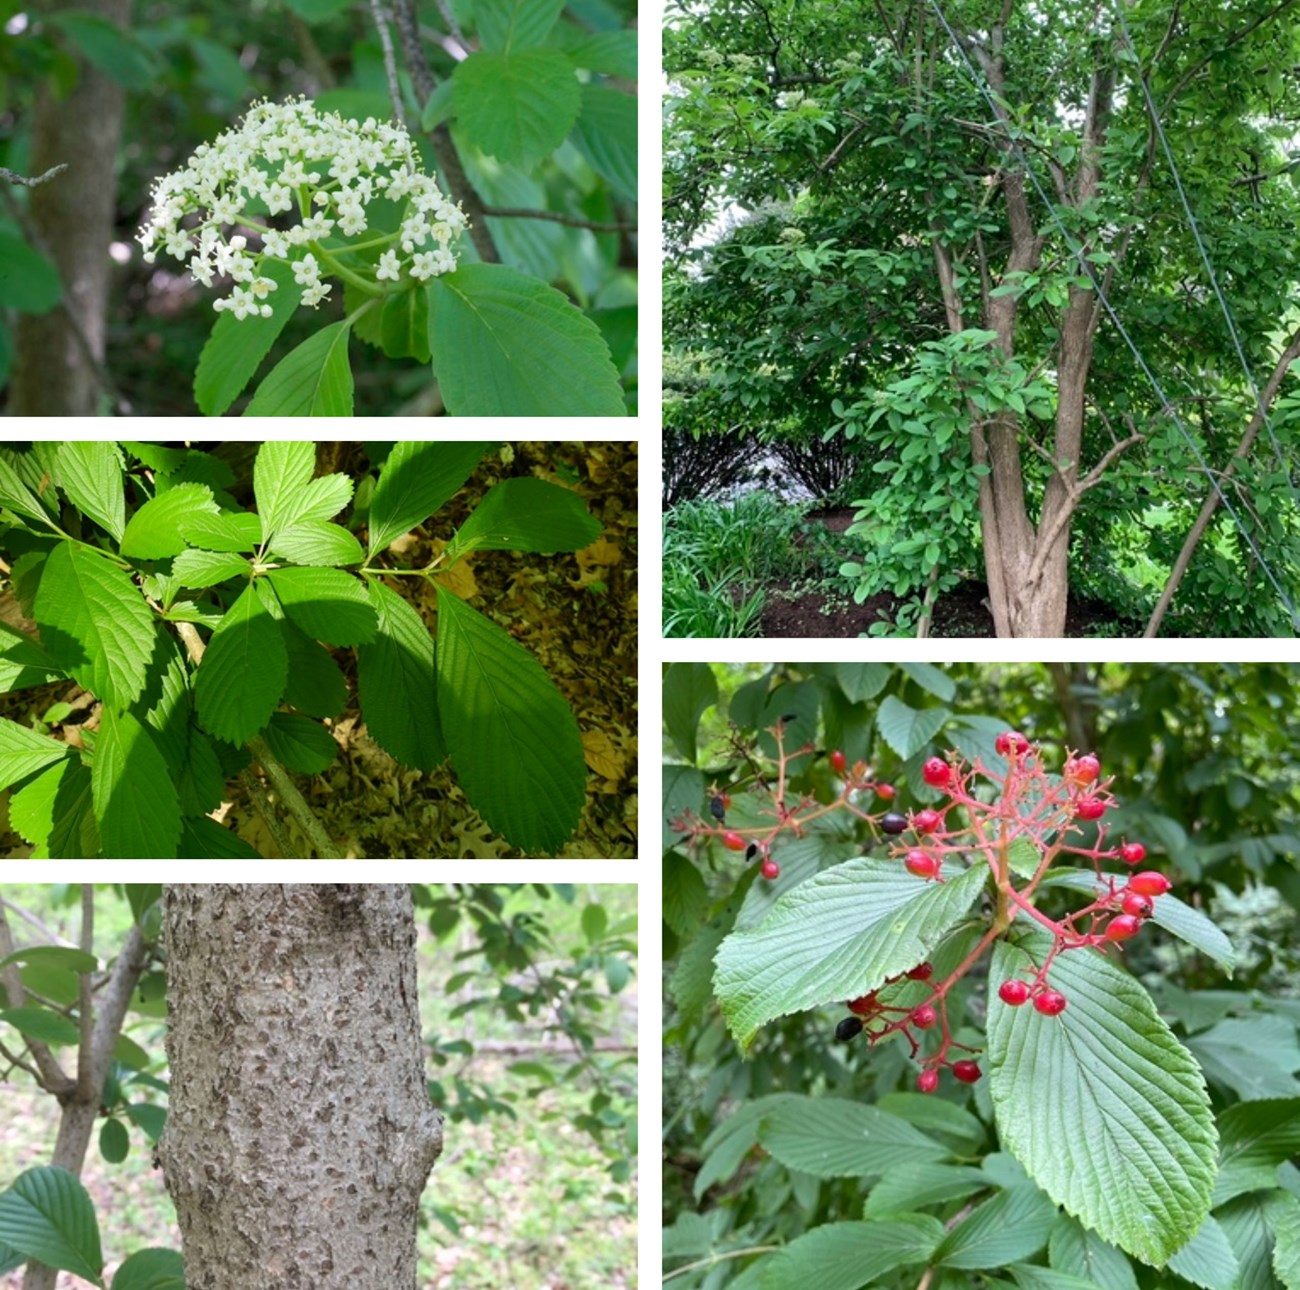 Collage of viburnum sieboldii including photos of flowers, fruit, leaves, bark, and the entire plant